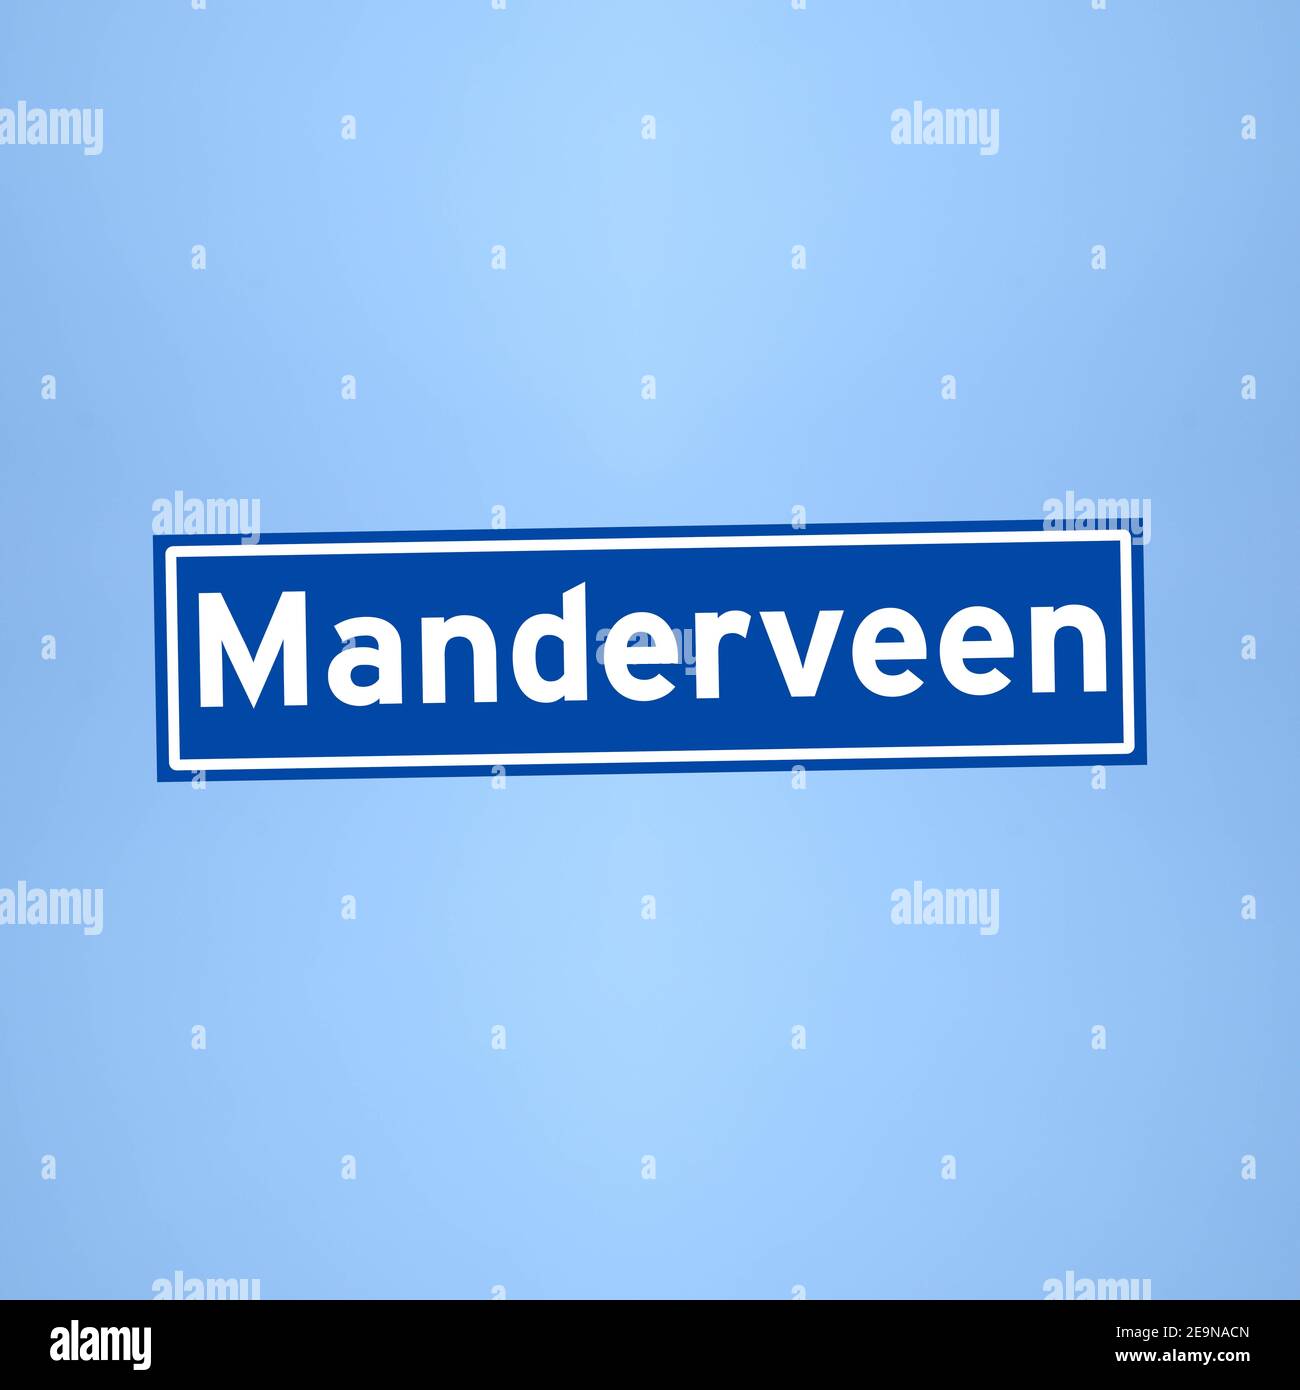 Manderveen place name sign in the Netherlands Stock Photo